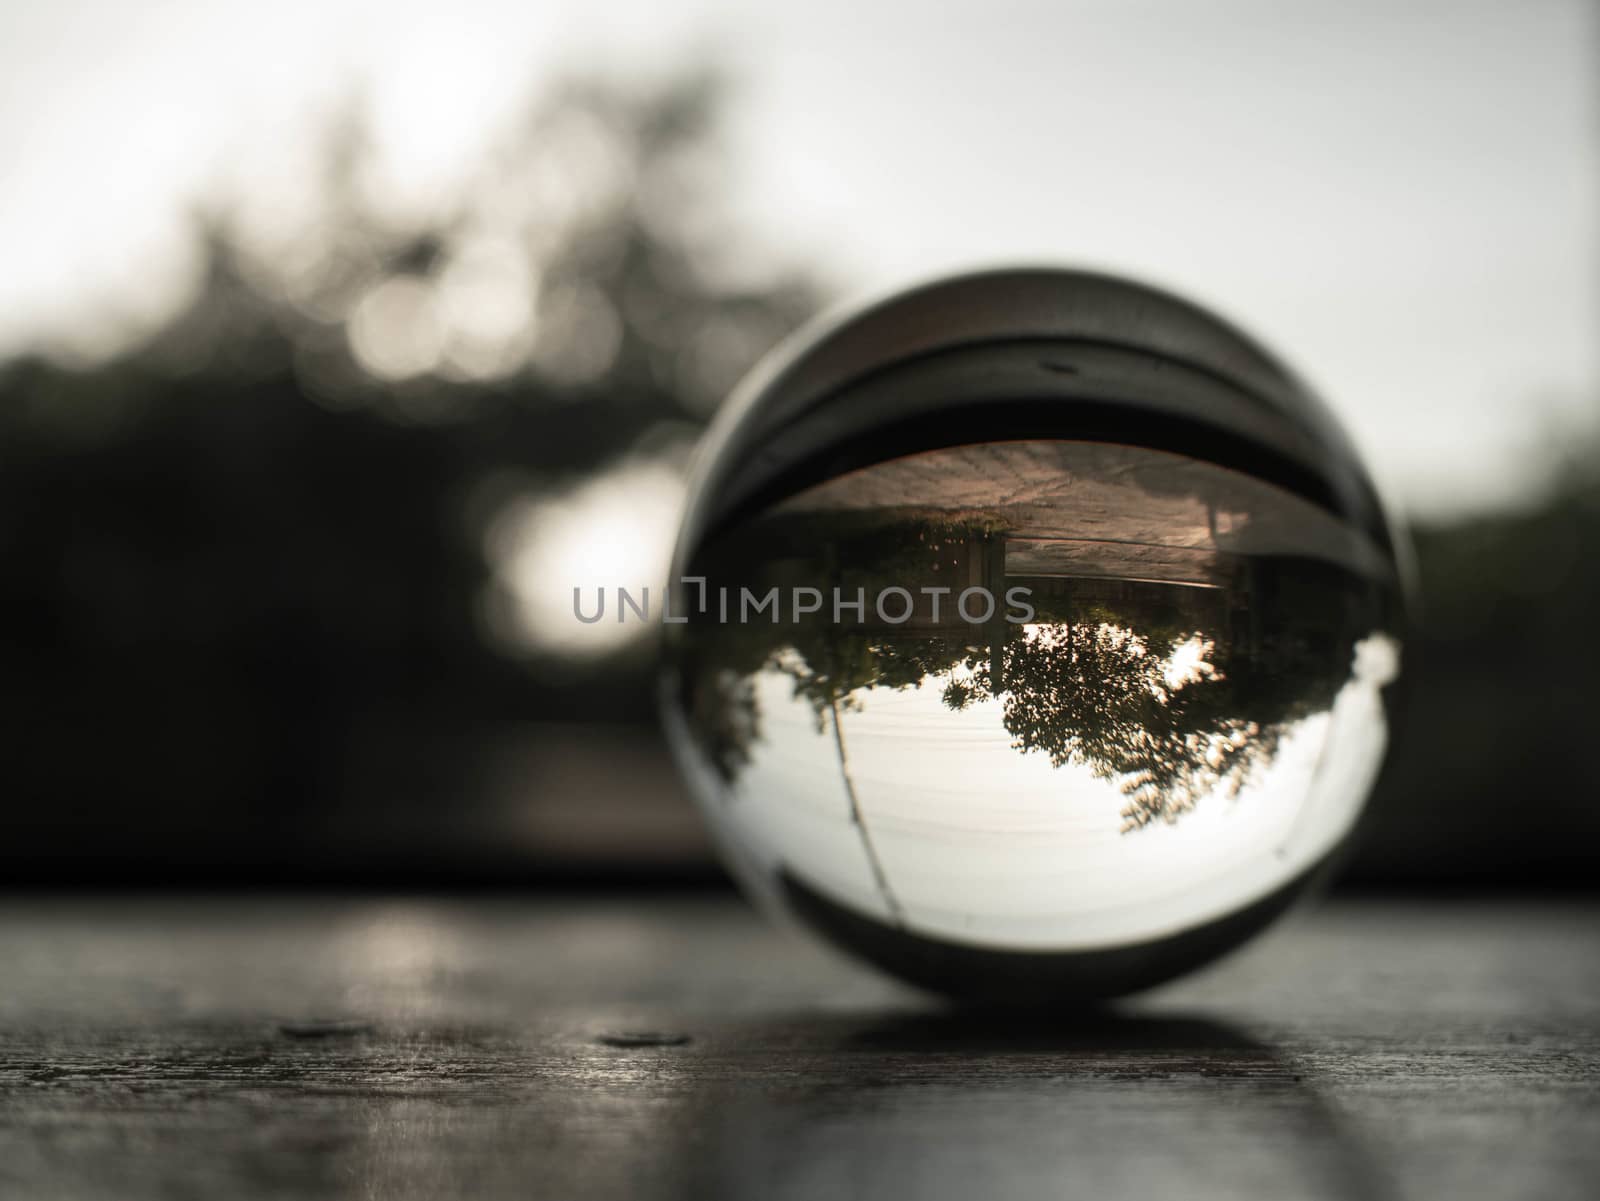 Crystal glass ball sphere revealing the inner tree with environment on nature bokeh background. Black and white style tone.